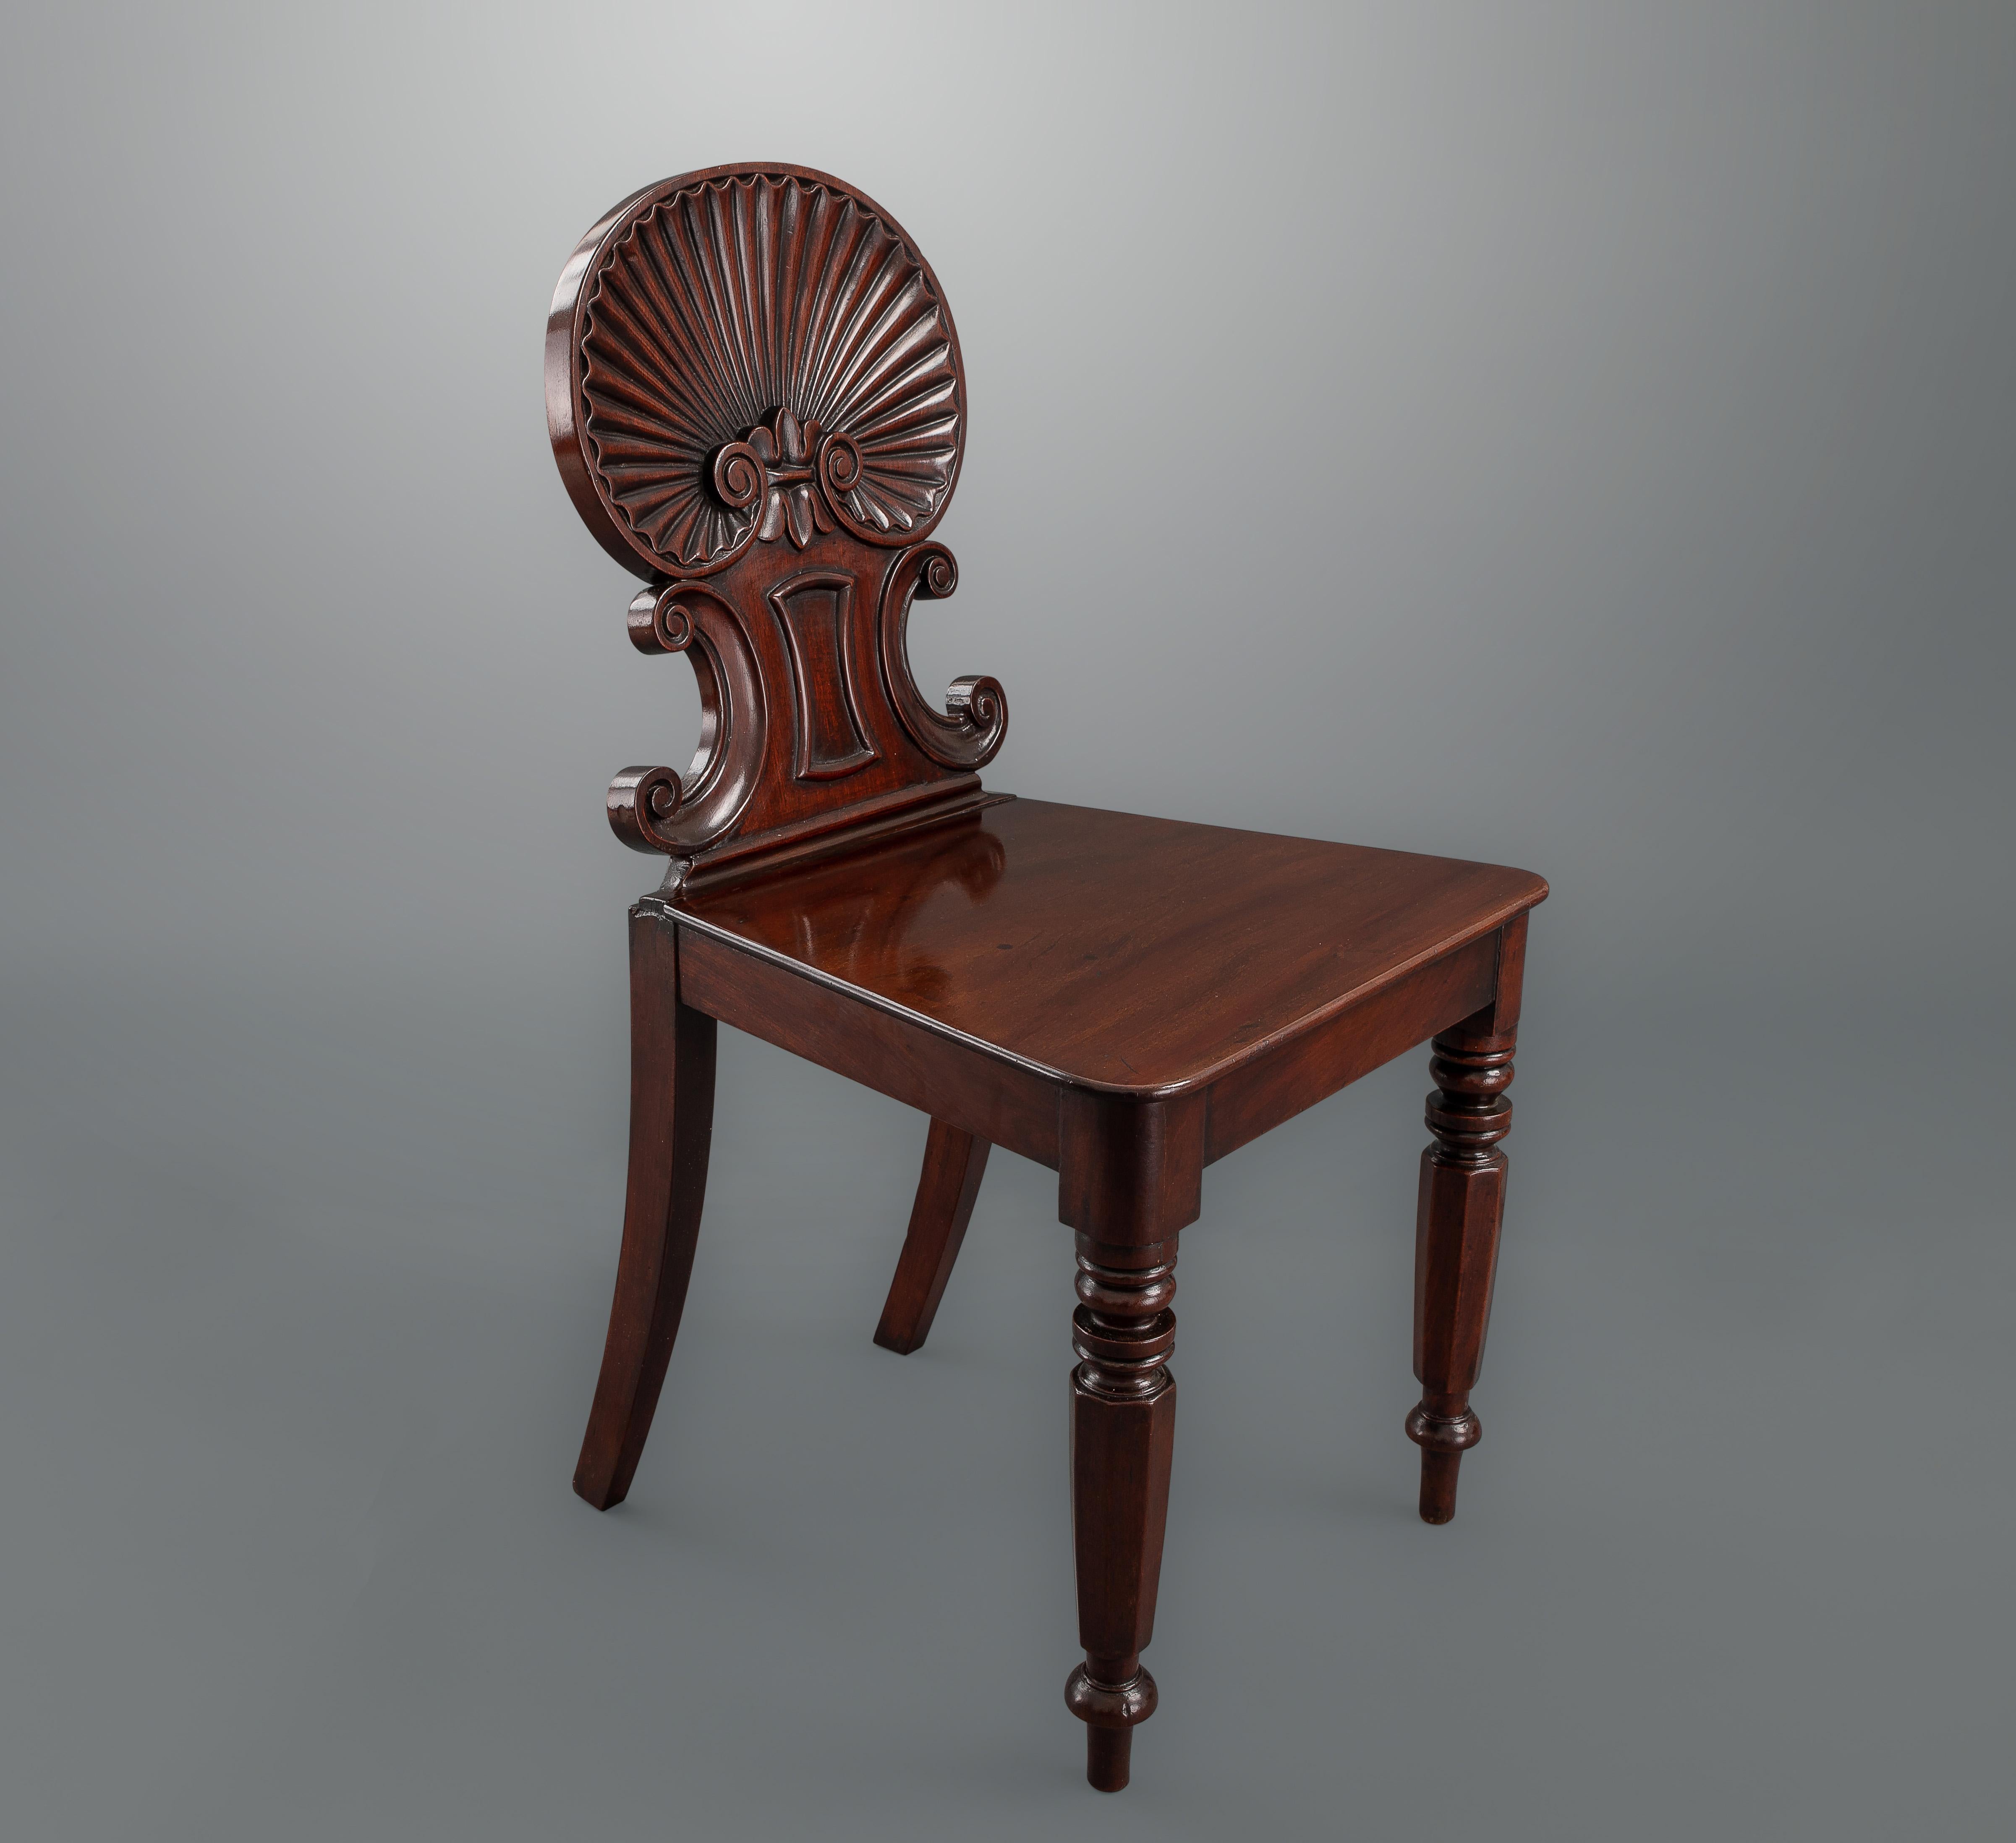 A superb pair of shell-back mahogany chairs probably by Gillows of London and Lancaster with excellent carving and great color and patina. The chair backs, richly carved with Venus-shell and C-scrolls predate the robust antique style promoted by